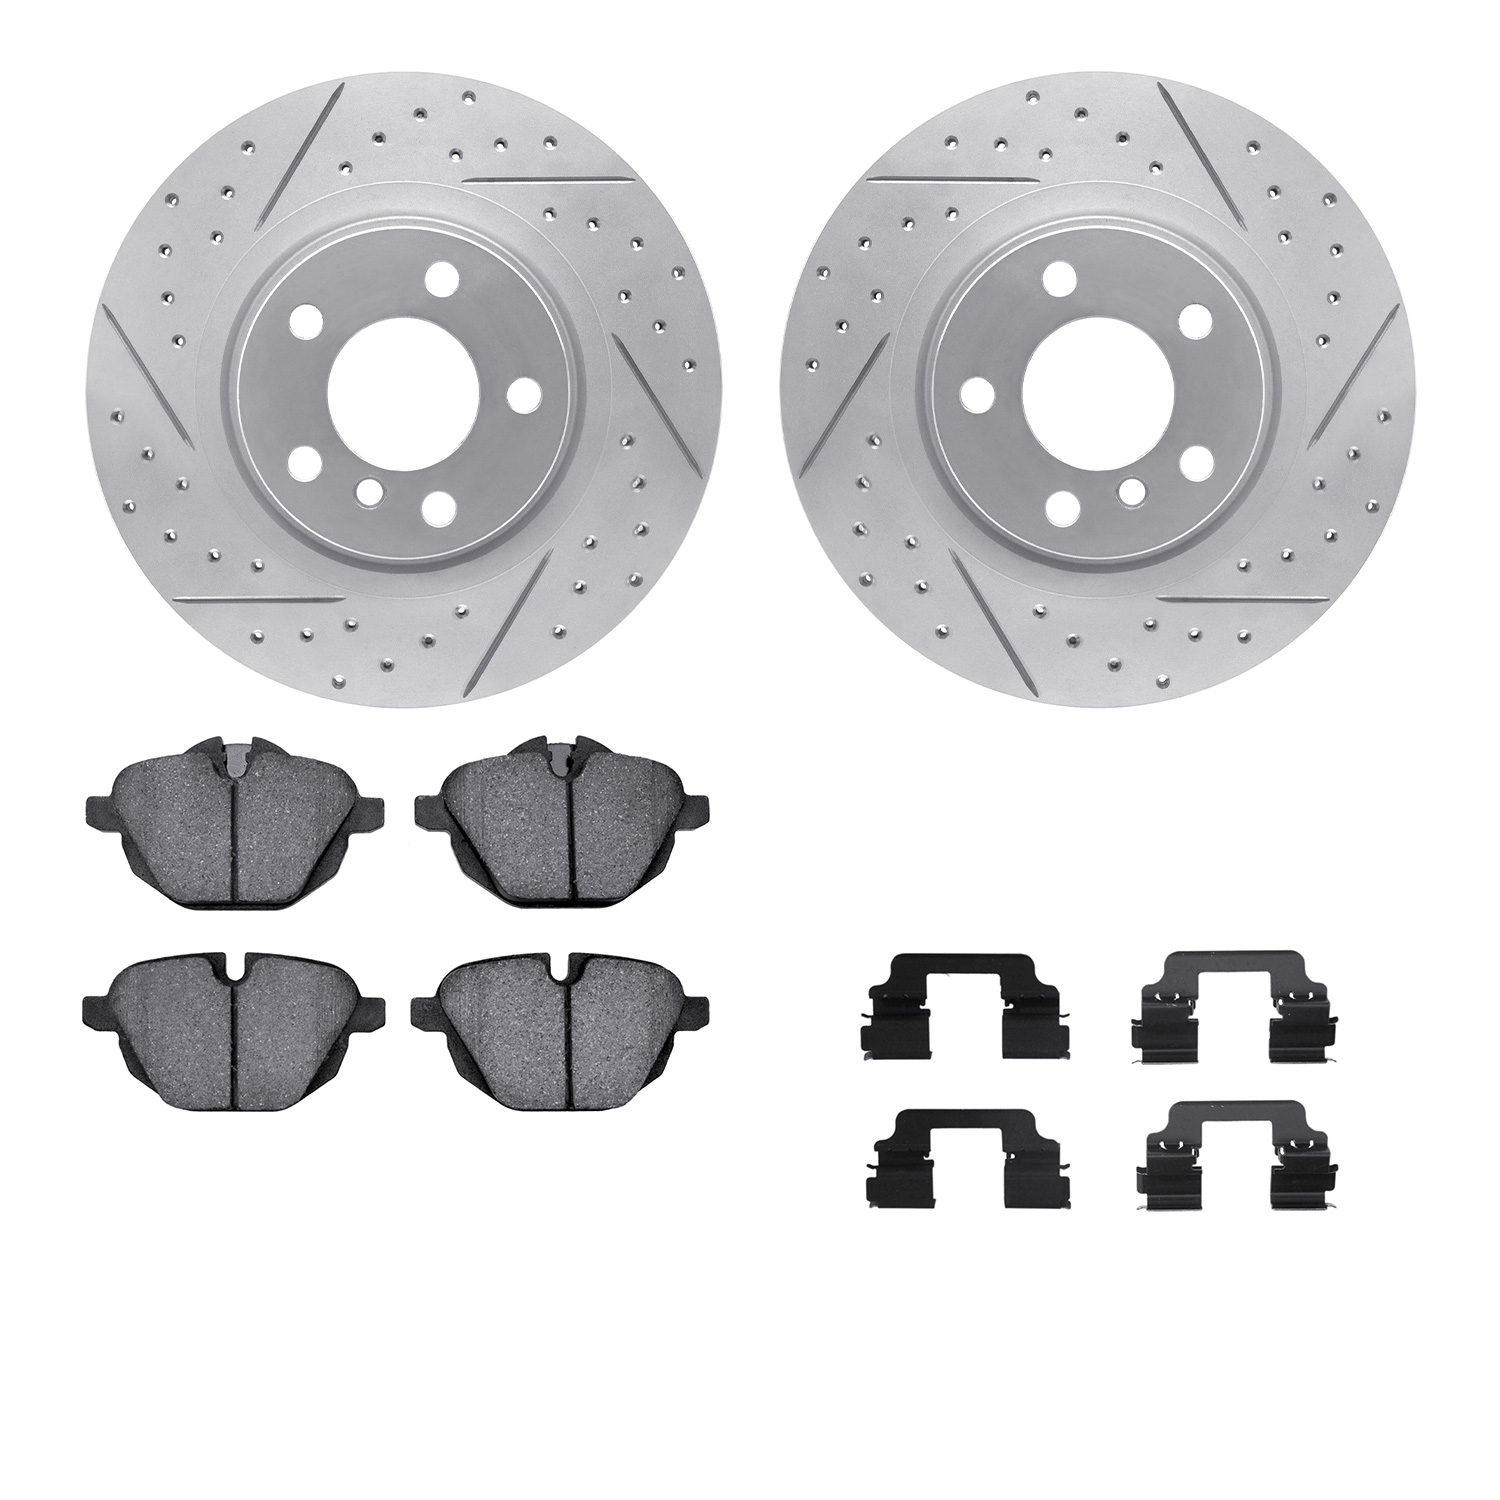 2512-31116 Geoperformance Drilled/Slotted Rotors w/5000 Advanced Brake Pads Kit & Hardware, 2015-2018 BMW, Position: Rear